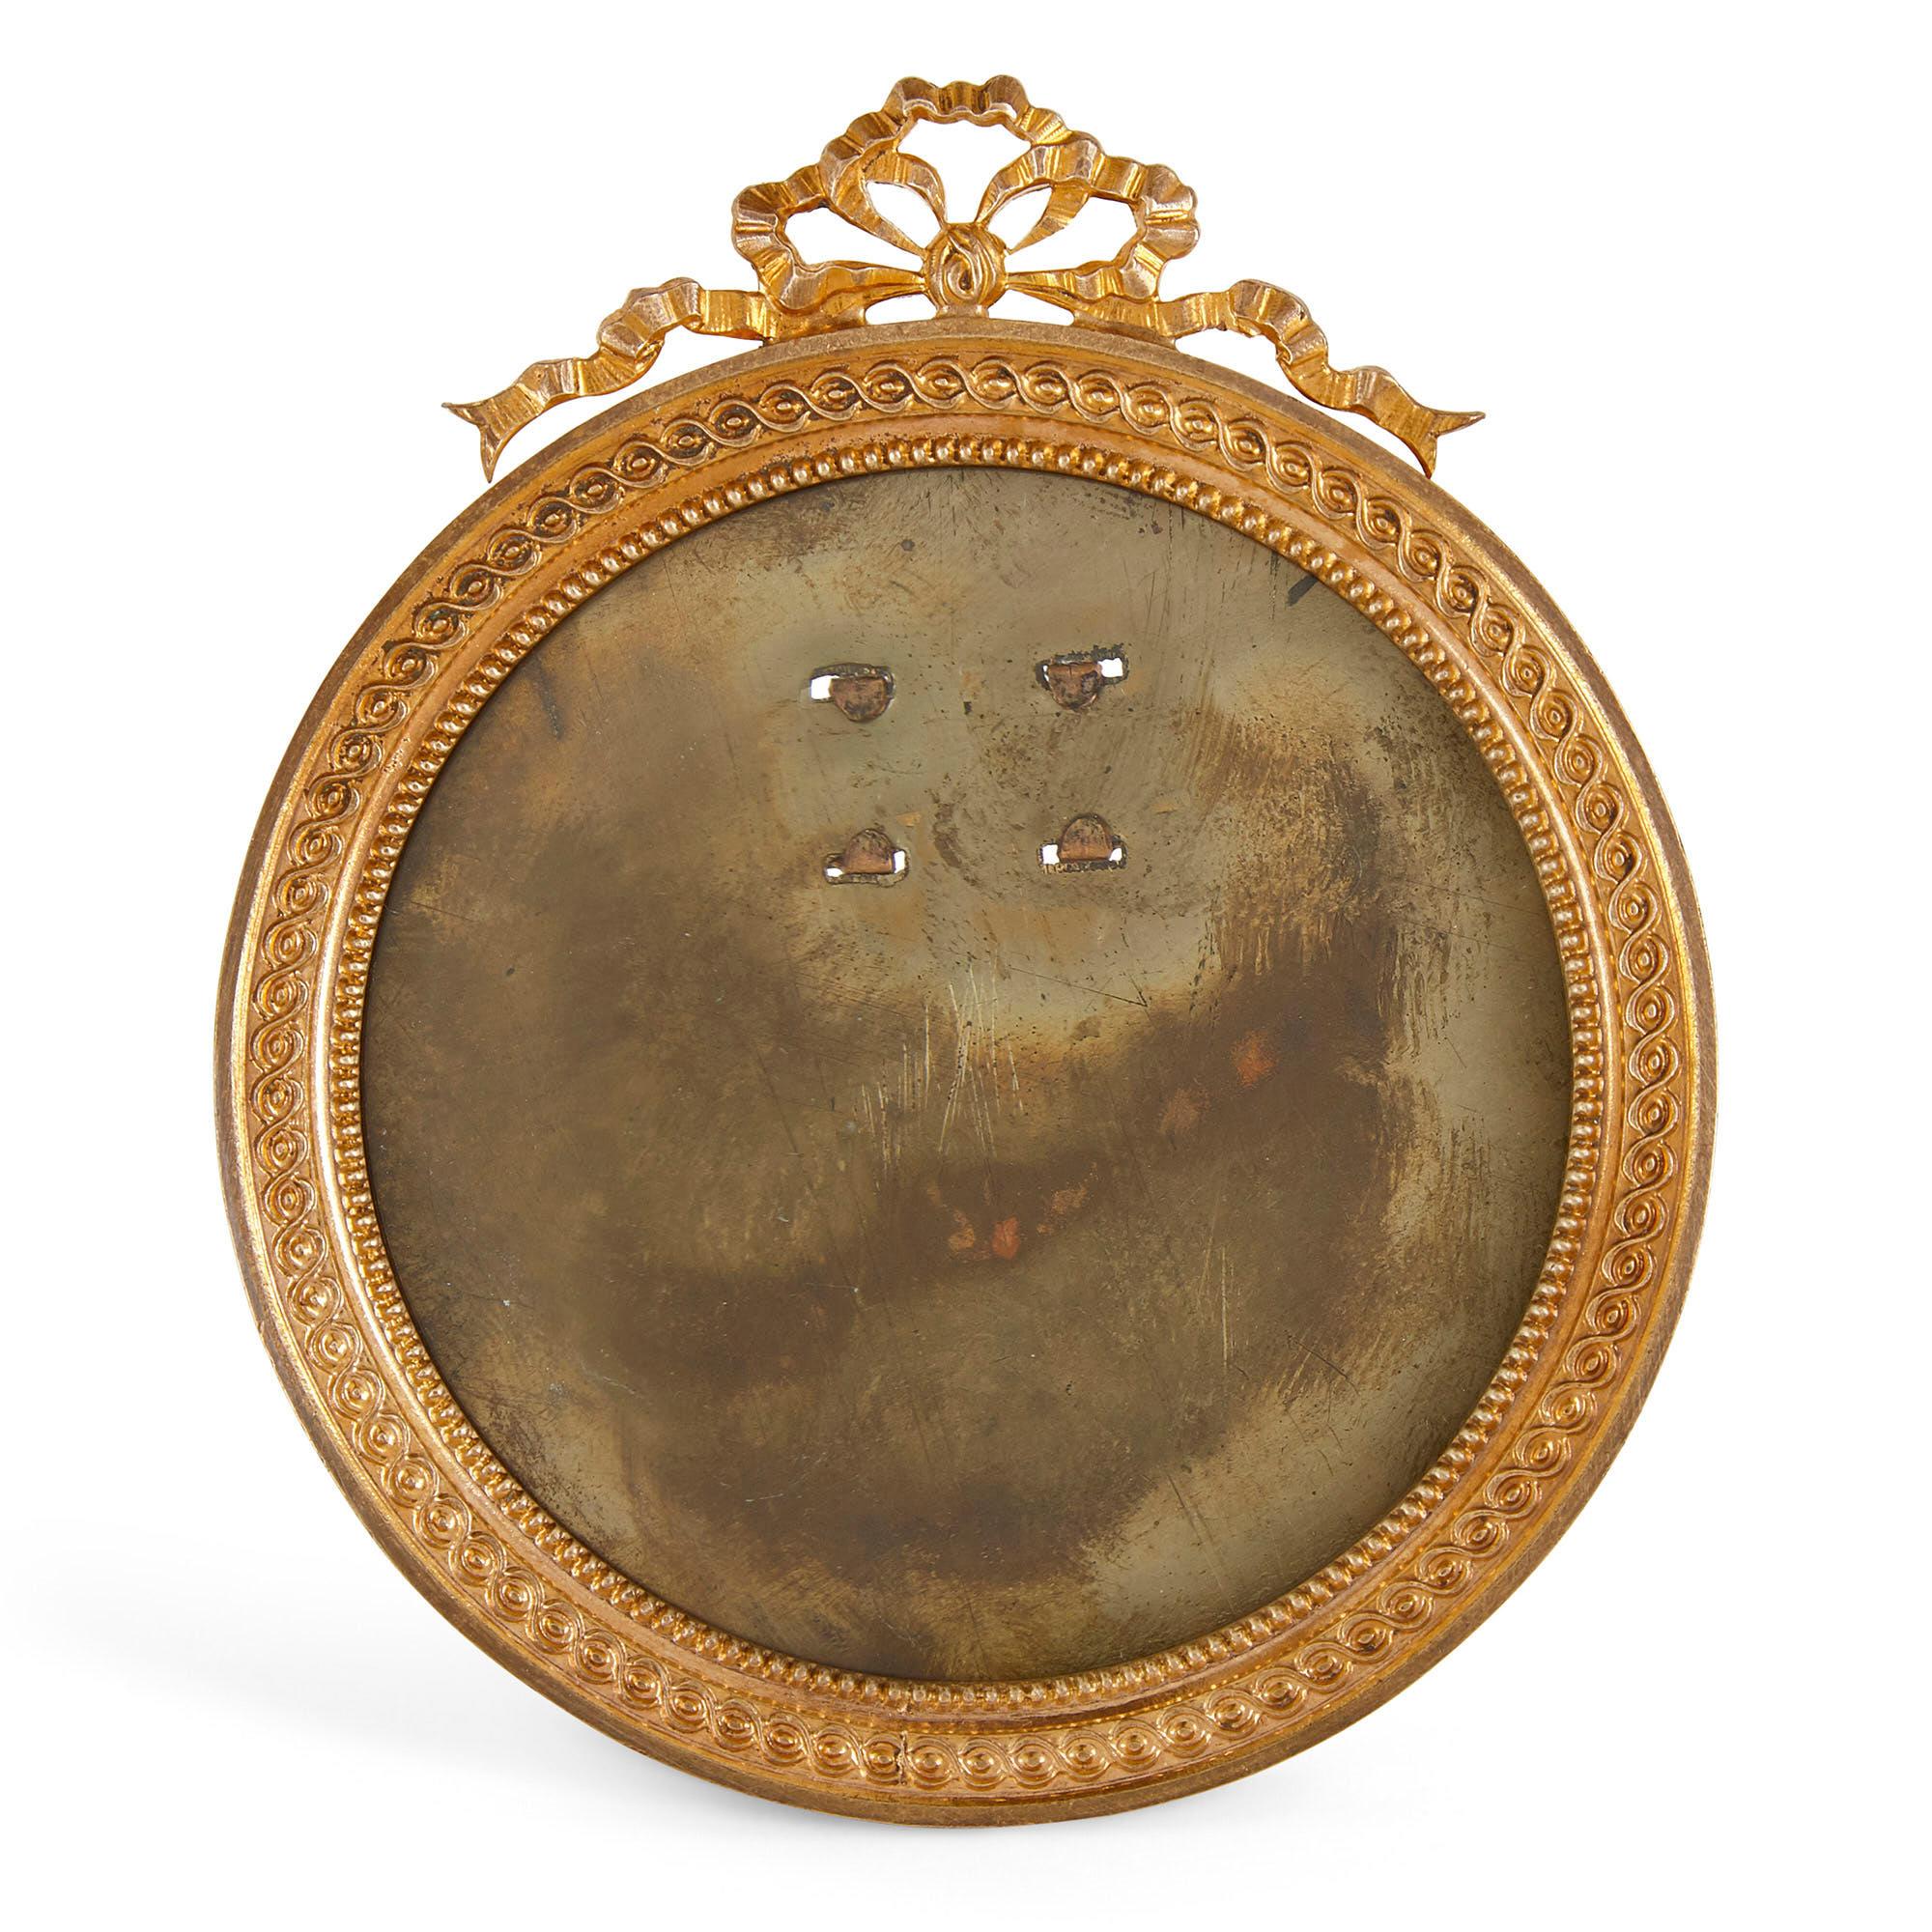 Empire style miniature gilt bronze picture frame
French, early 20th century
Measures: Height 9cm, width 8cm, depth 0.5cm

This beautiful miniature picture frame is designed in the French Empire style. The frame is circular in form, moulded with